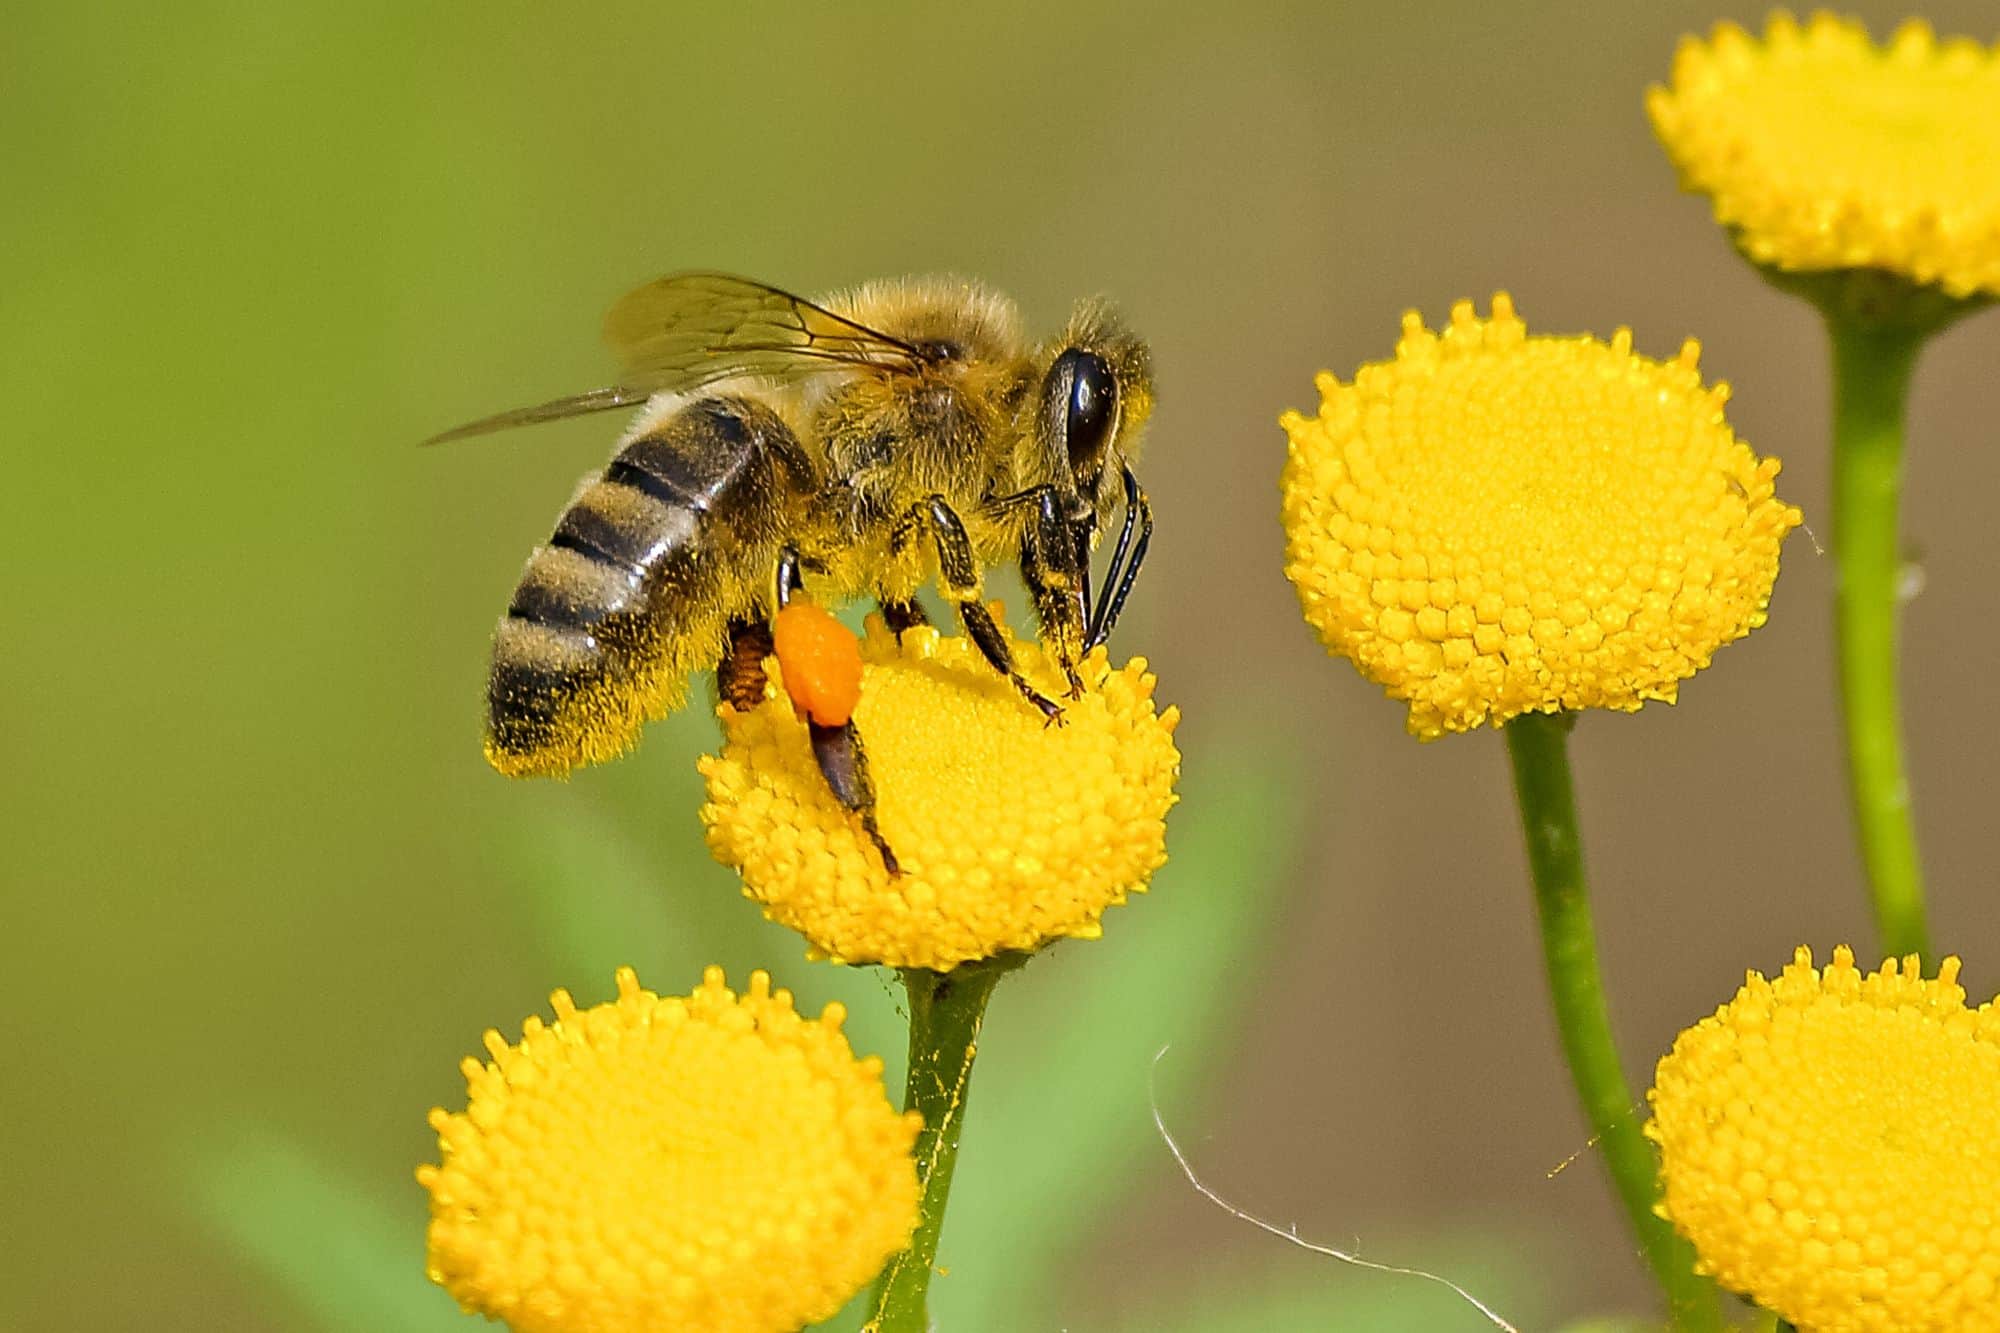 A close up image of a bee on button sized yellow flowers.